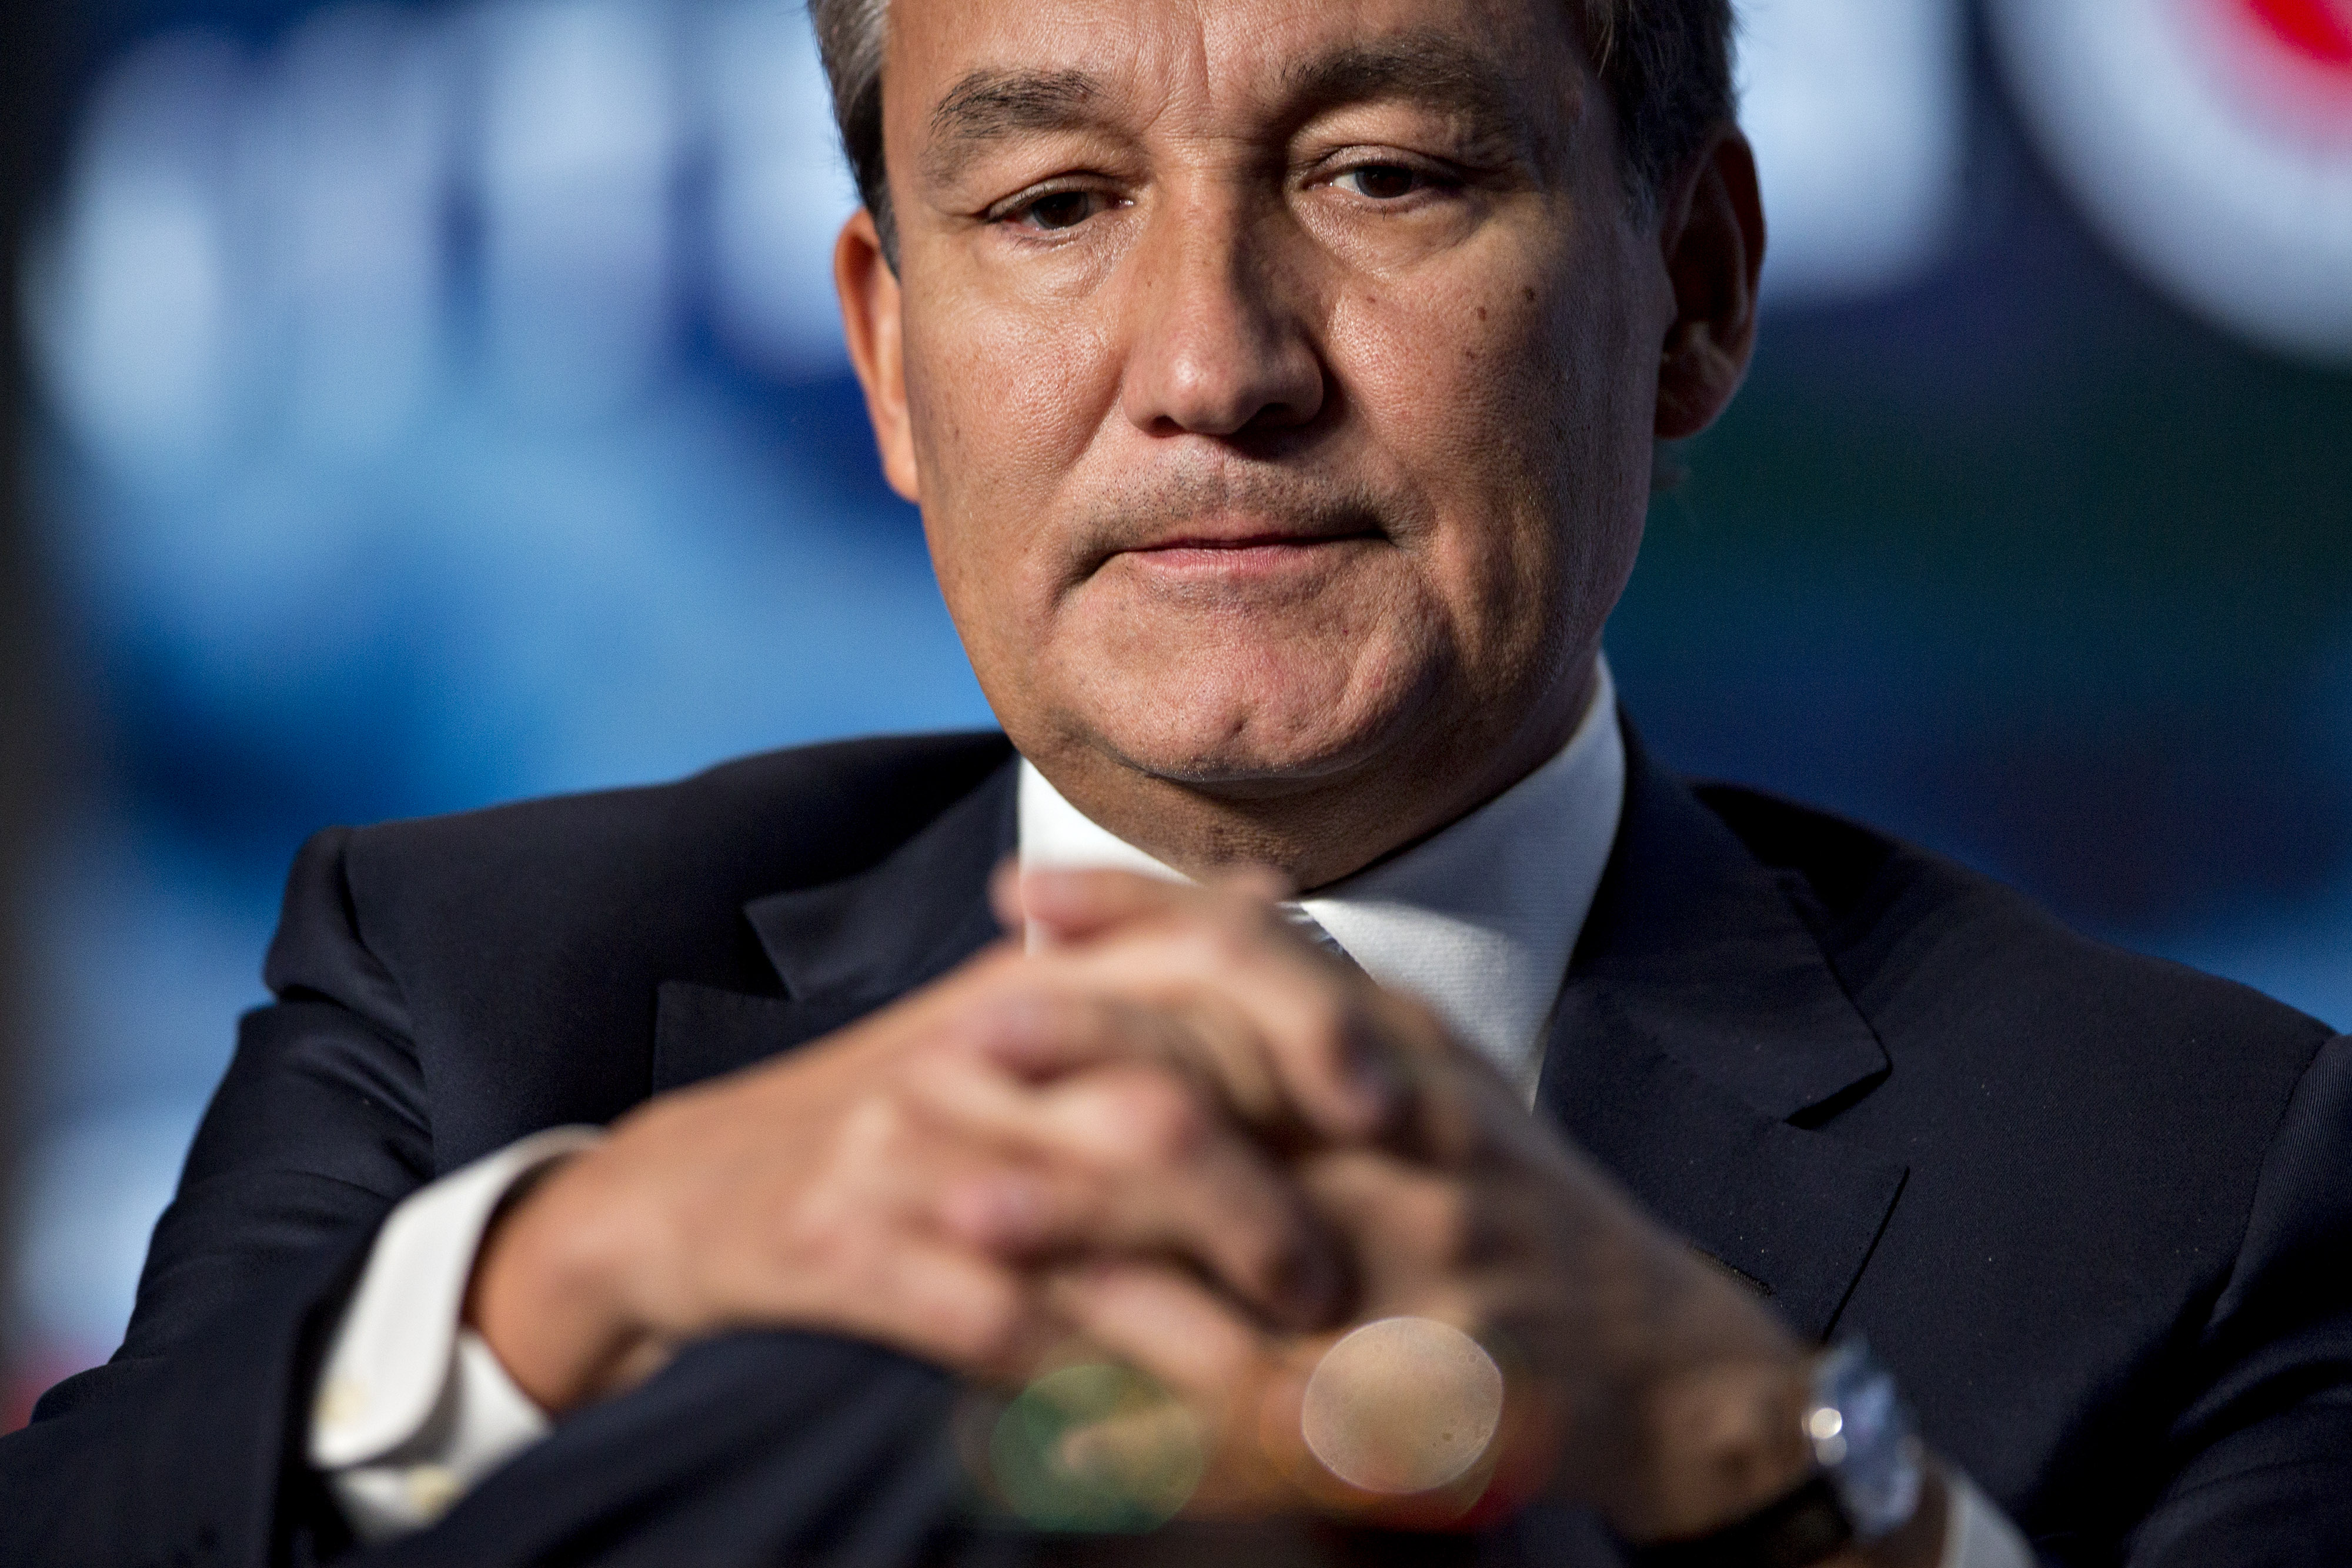 Oscar Munoz, chief executive officer of United Continental Holdings Inc., listens during a discussion at the U.S. Chamber of Commerce aviation summit in Washington, D.C., on March 2, 2017. (Andrew Harrer—Bloomberg/Getty Images)